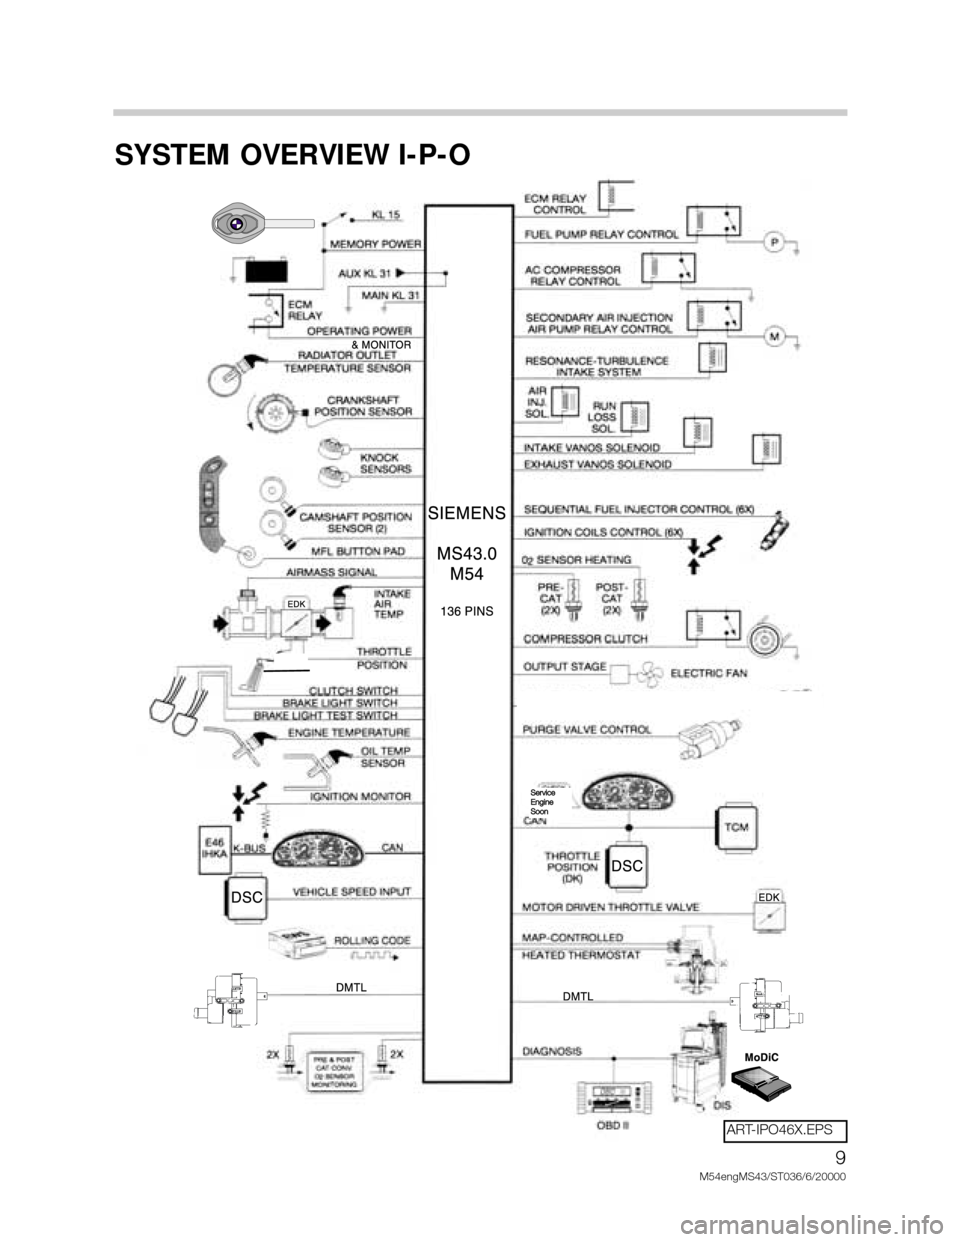 BMW X5 2006 E53 M54 Engine Workshop Manual 9
M54engMS43/ST036/6/20000
SYSTEM OVERVIEW I-P-O
Service 
Engine
Soon
ART-IPO46X.EPS 